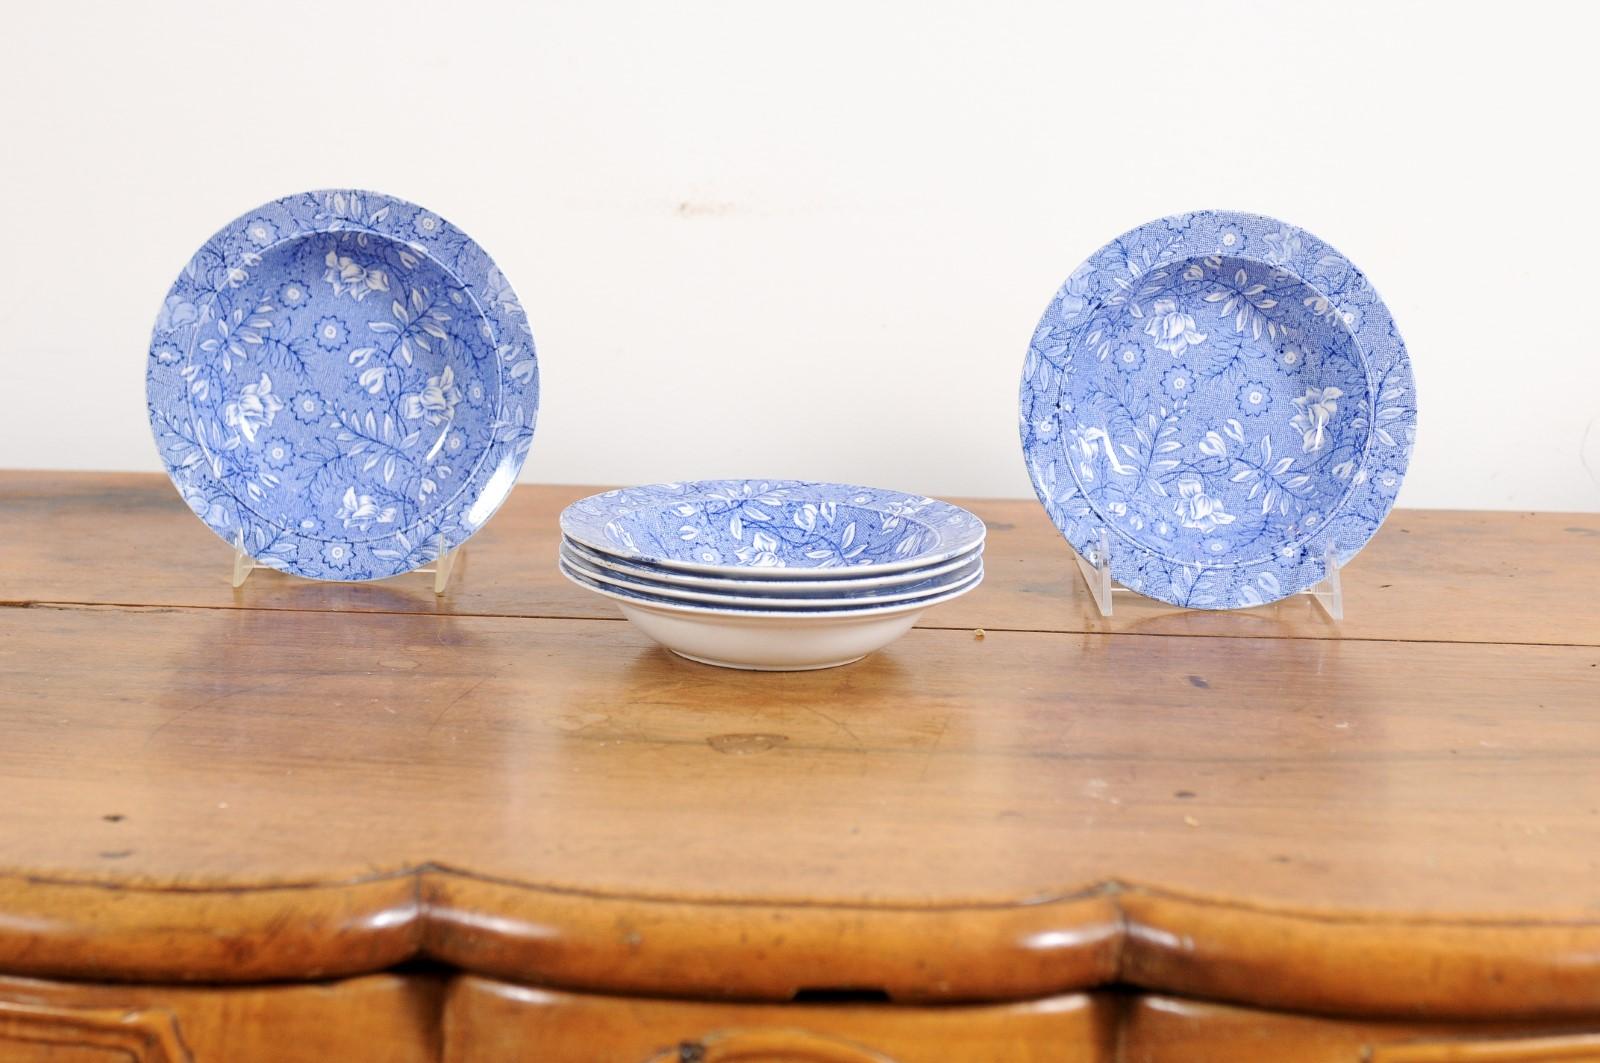 A set of six Royal Tudor Ware blue and white porcelain bowls from the late 19th century, with floral pattern. Created in England during the last quarter of the 19th century, each of this set of six small porcelain bowls features a blue and white